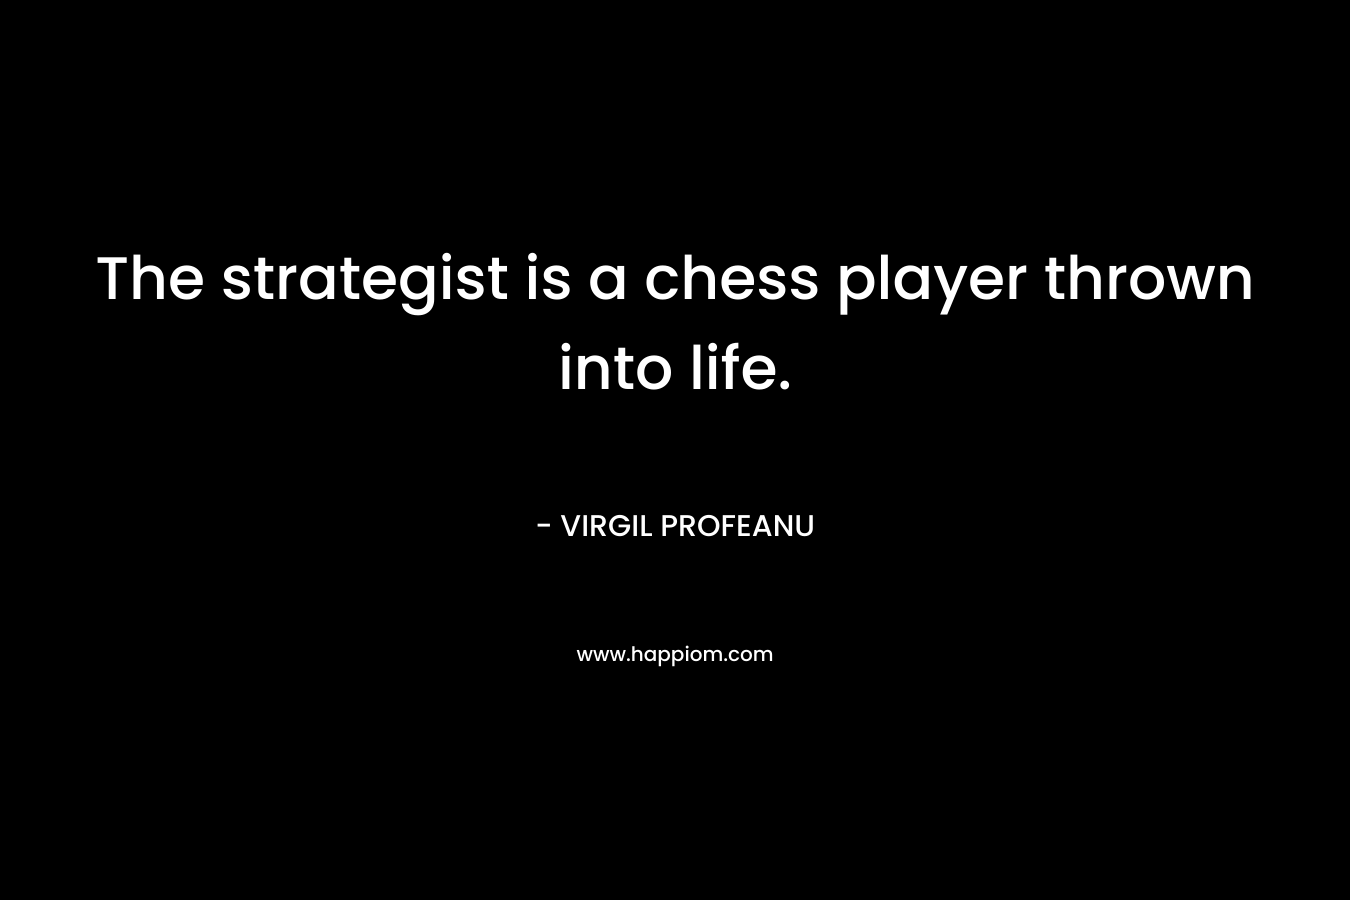 The strategist is a chess player thrown into life. – VIRGIL PROFEANU